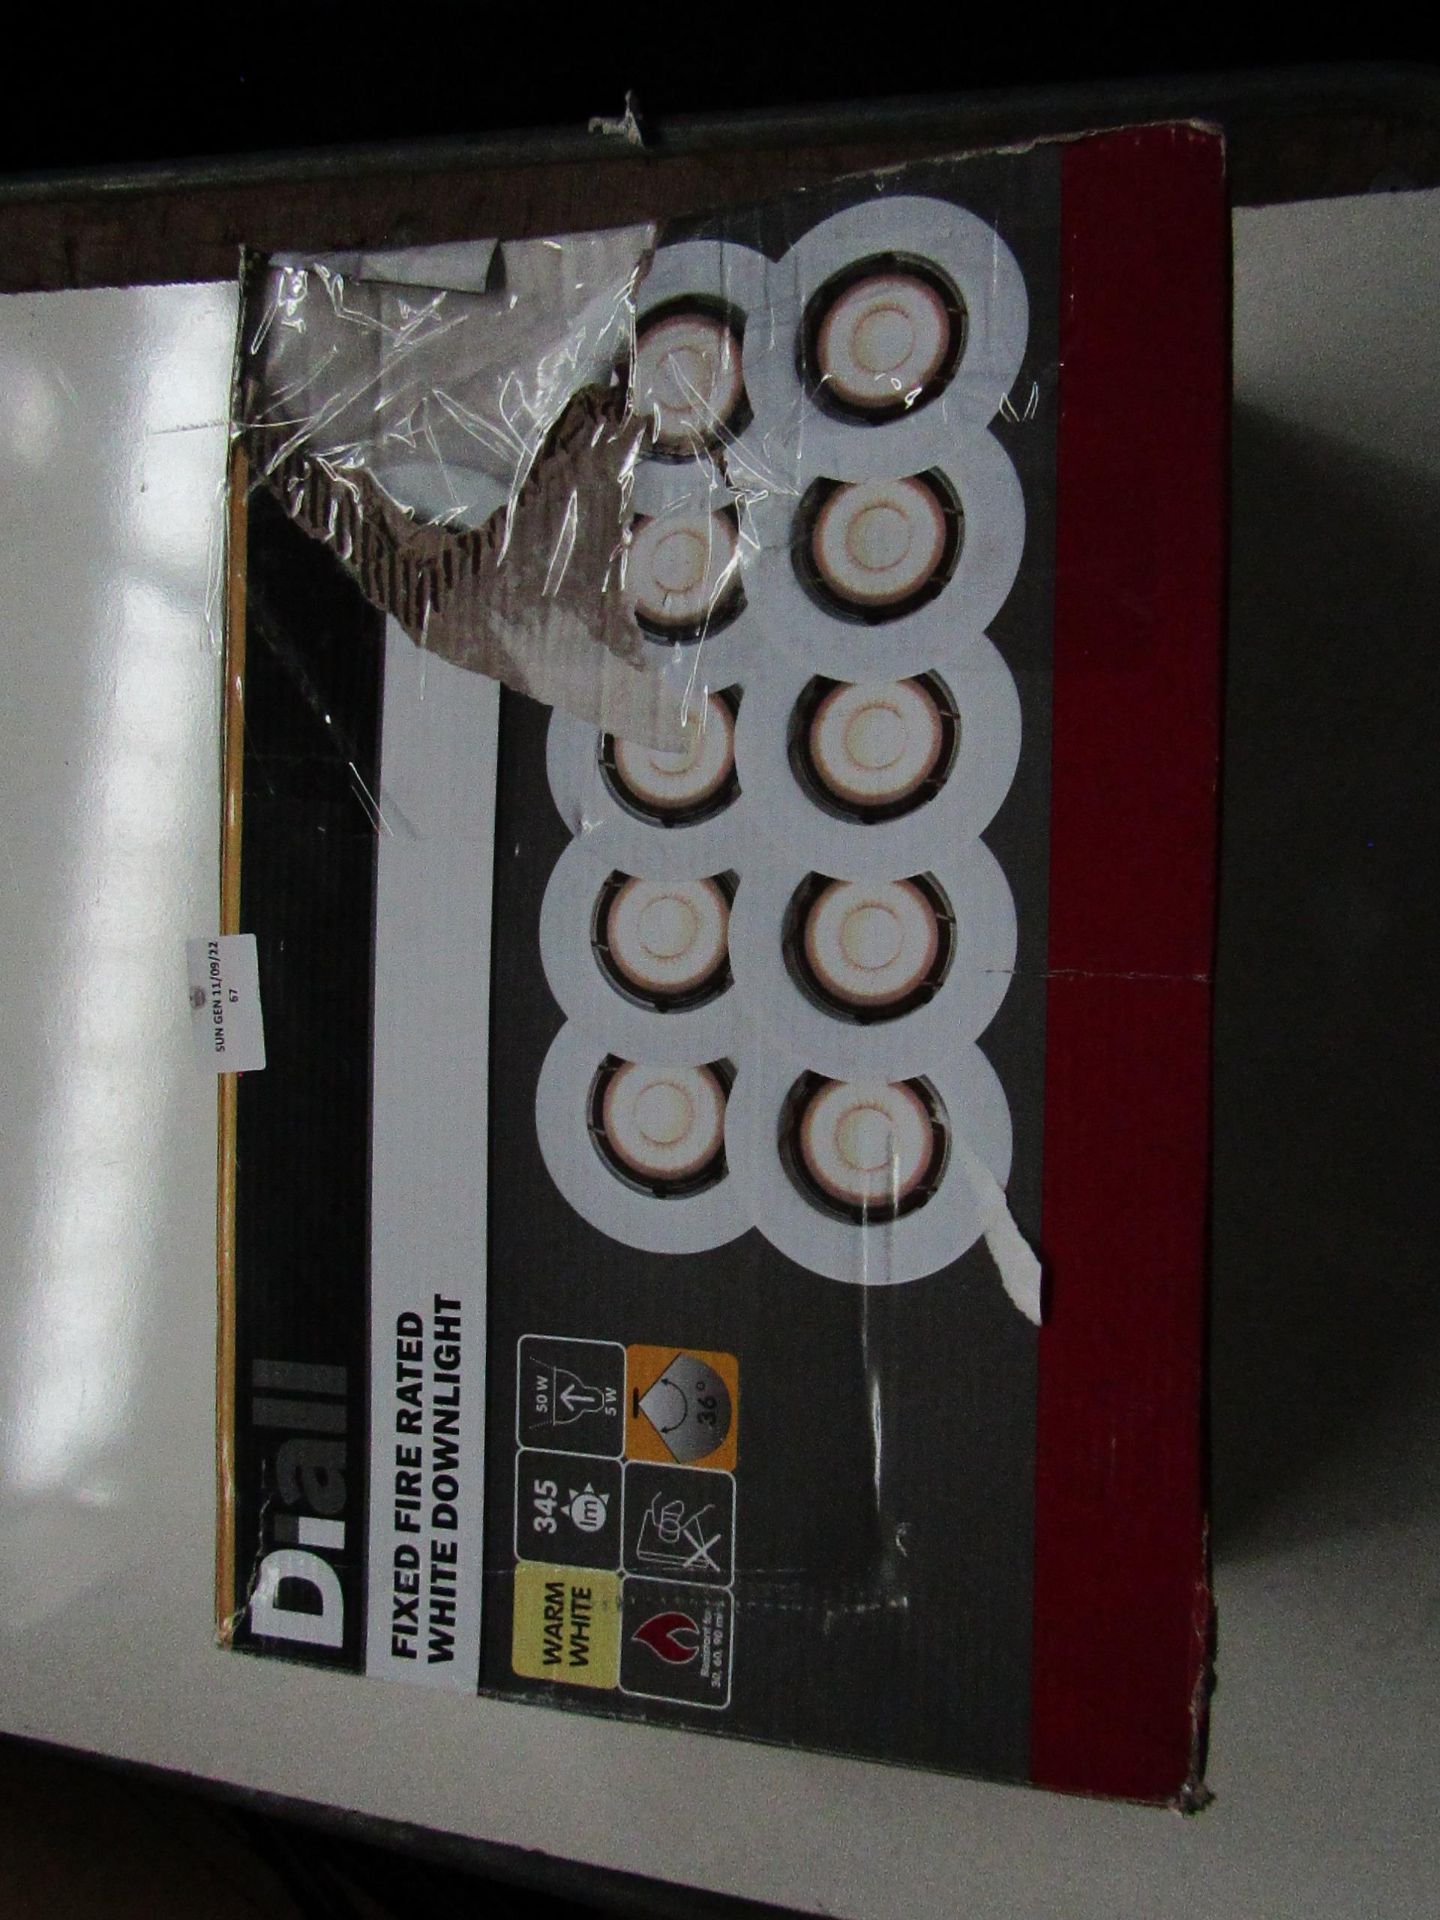 Diall - Set of 10 Fixed Fire Rated White Downlights - Unchecked, Box Damaged.